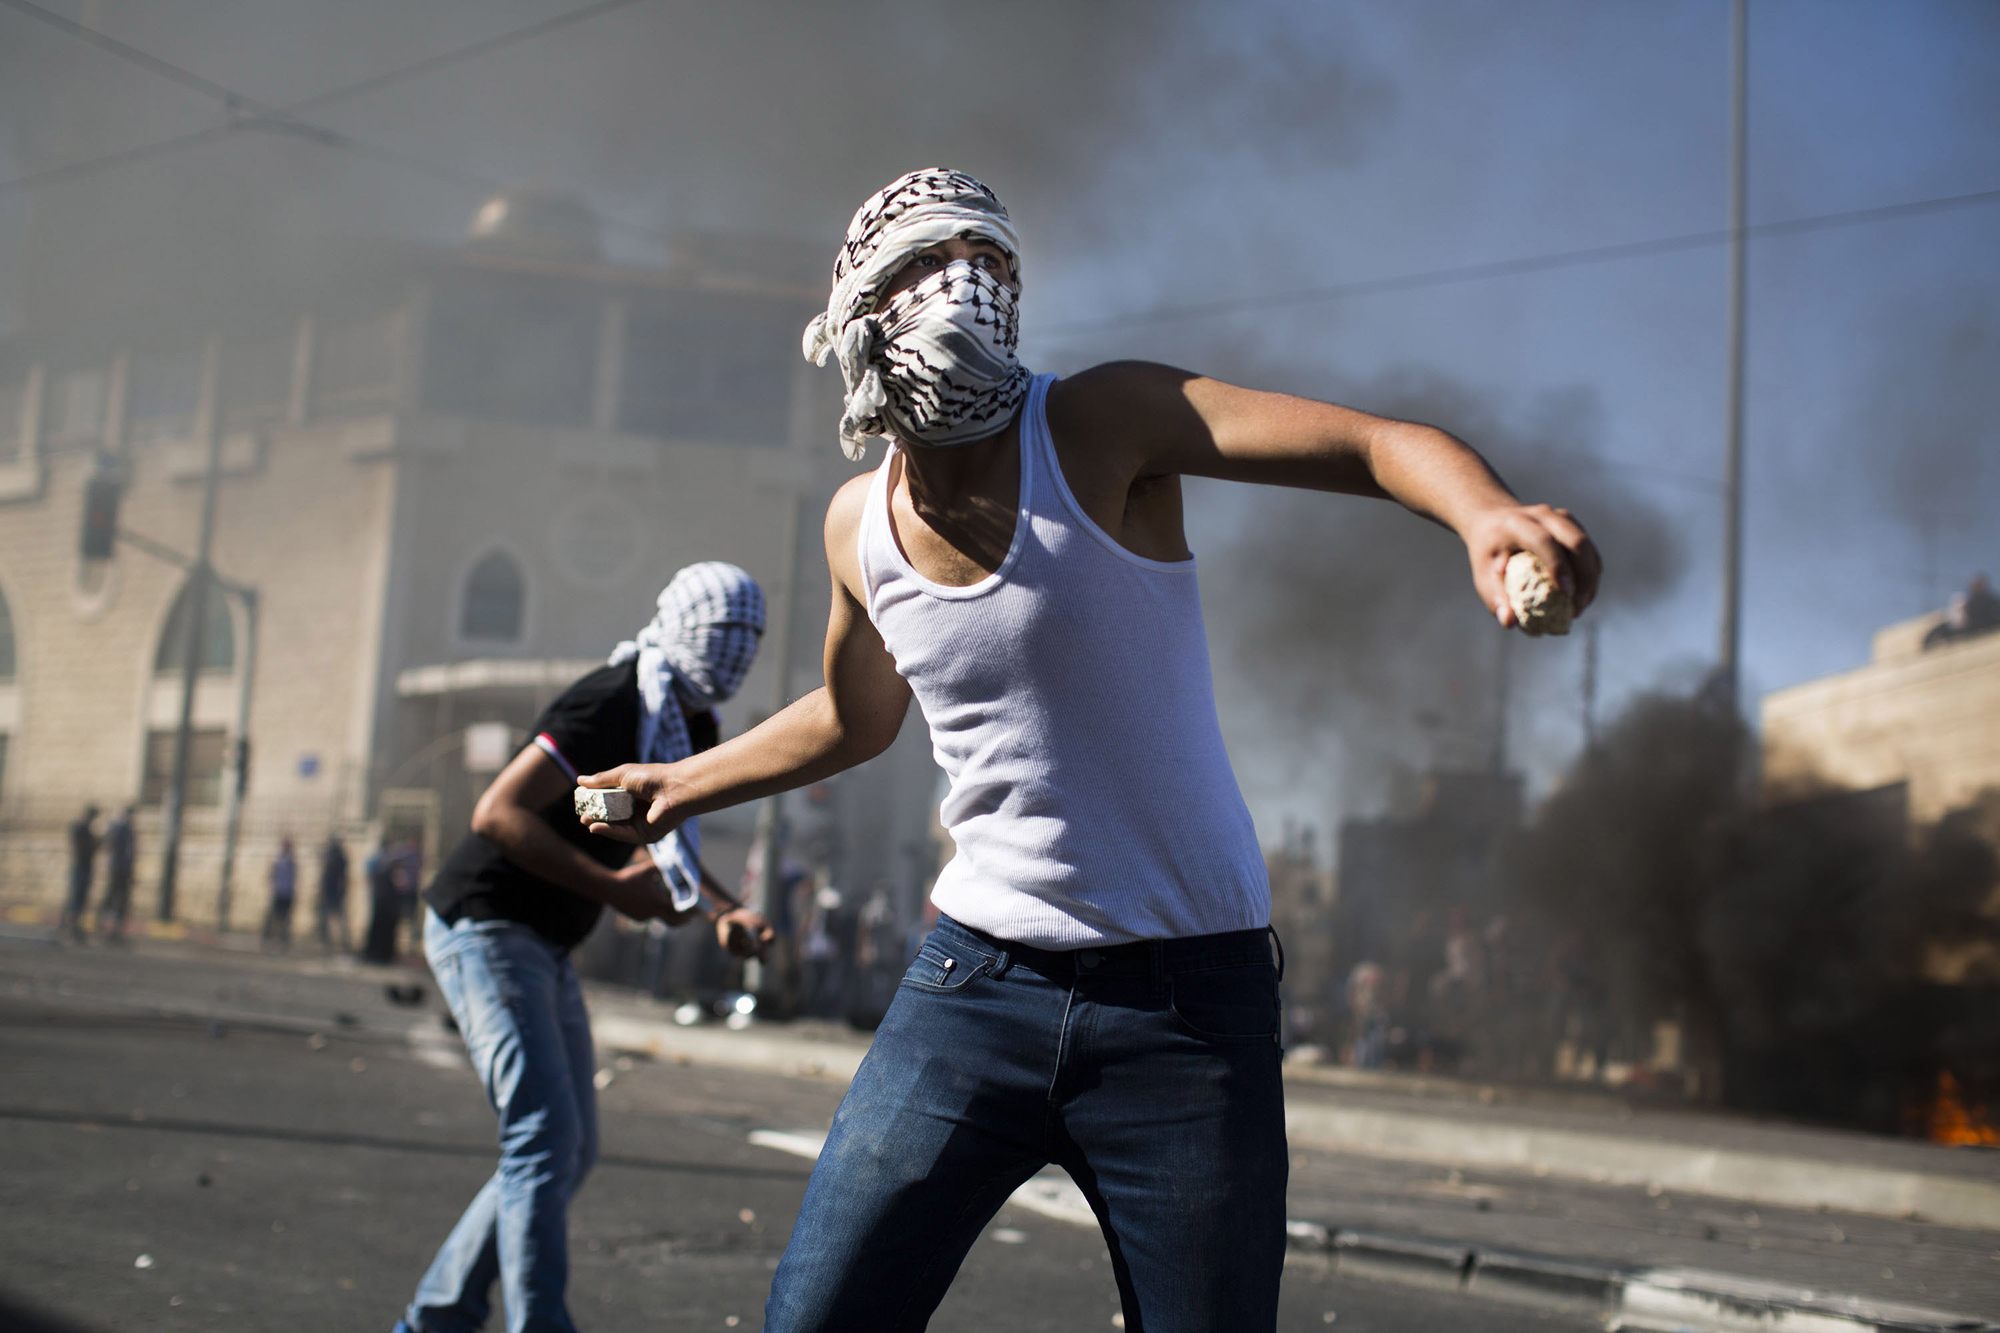 Palestinian youths clash with Israeli police in Jerusalem on July 2.